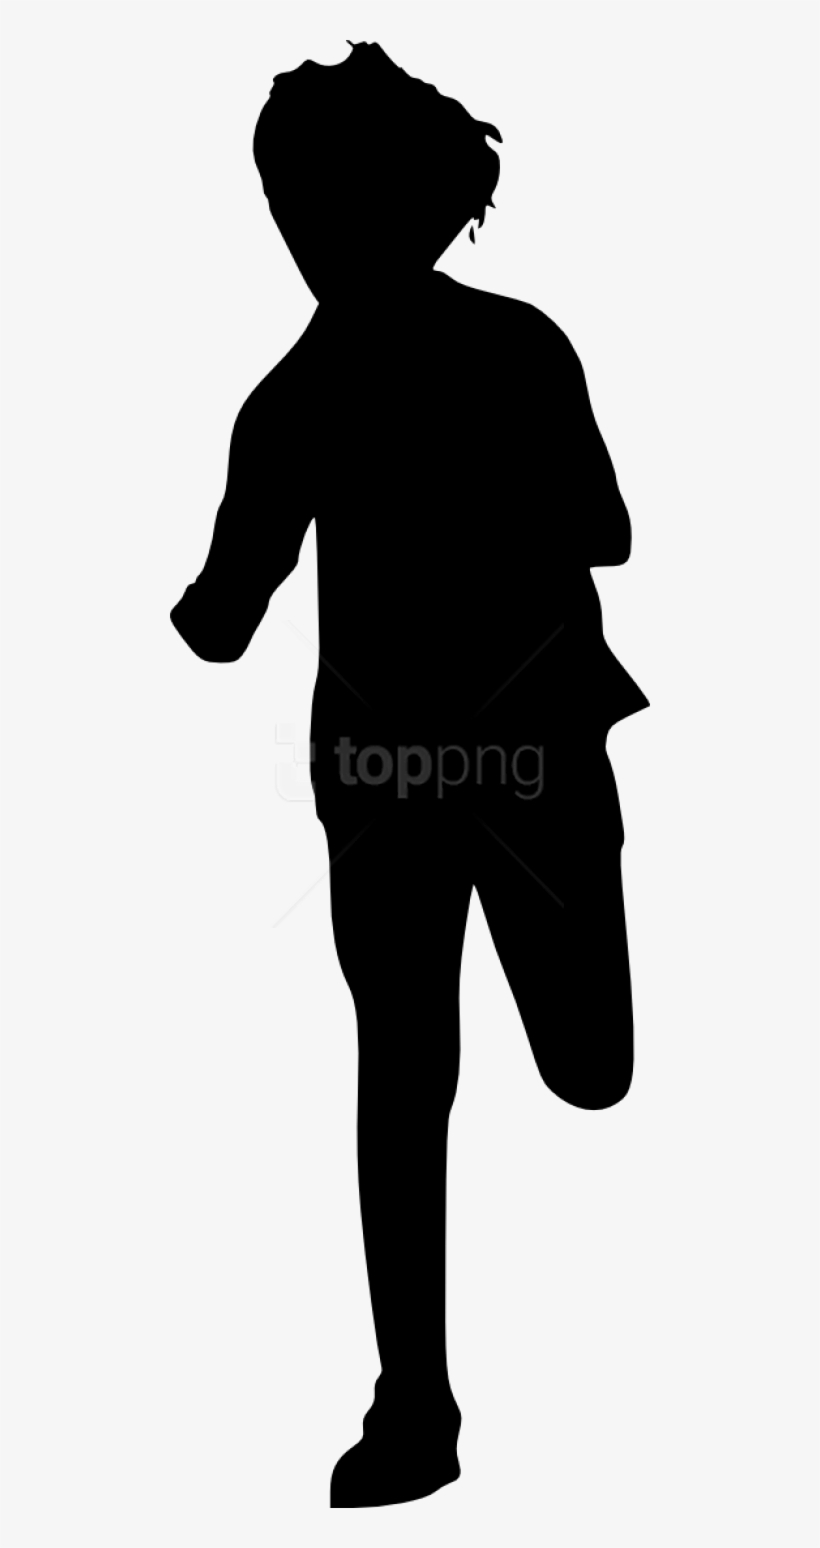 Free Png Kid Running Silhouette Png Images Transparent - Silhouette Running Man Png, transparent png #9337078